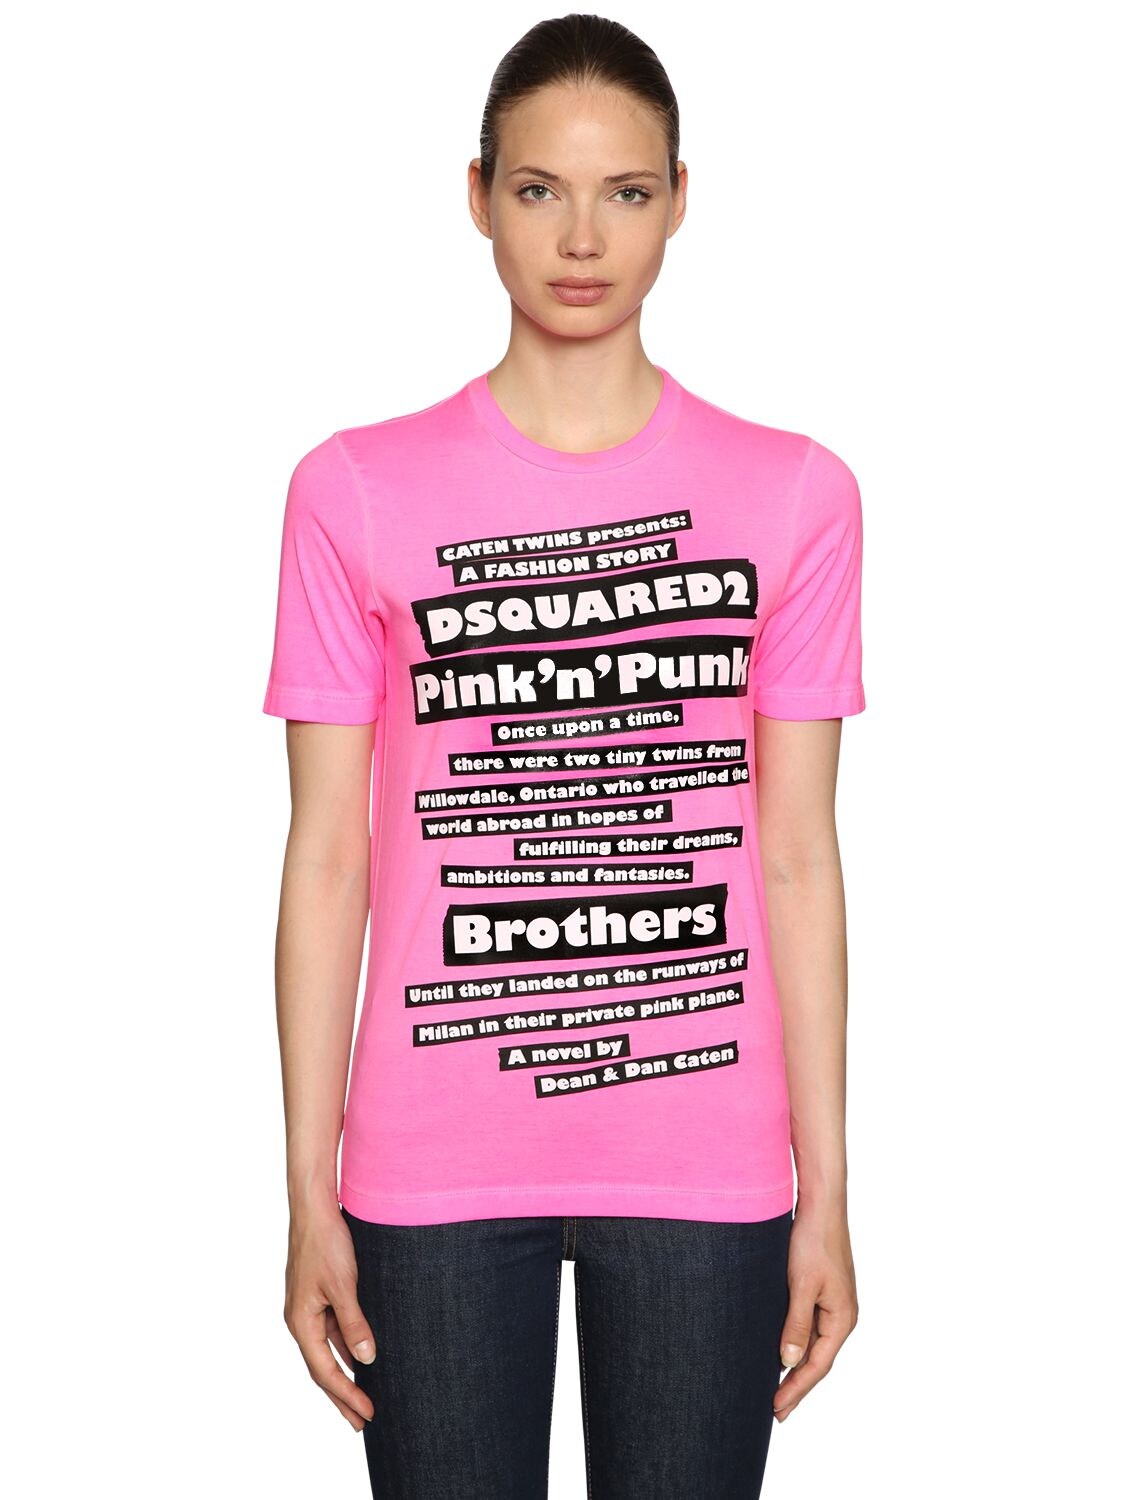 dsquared pink t shirt